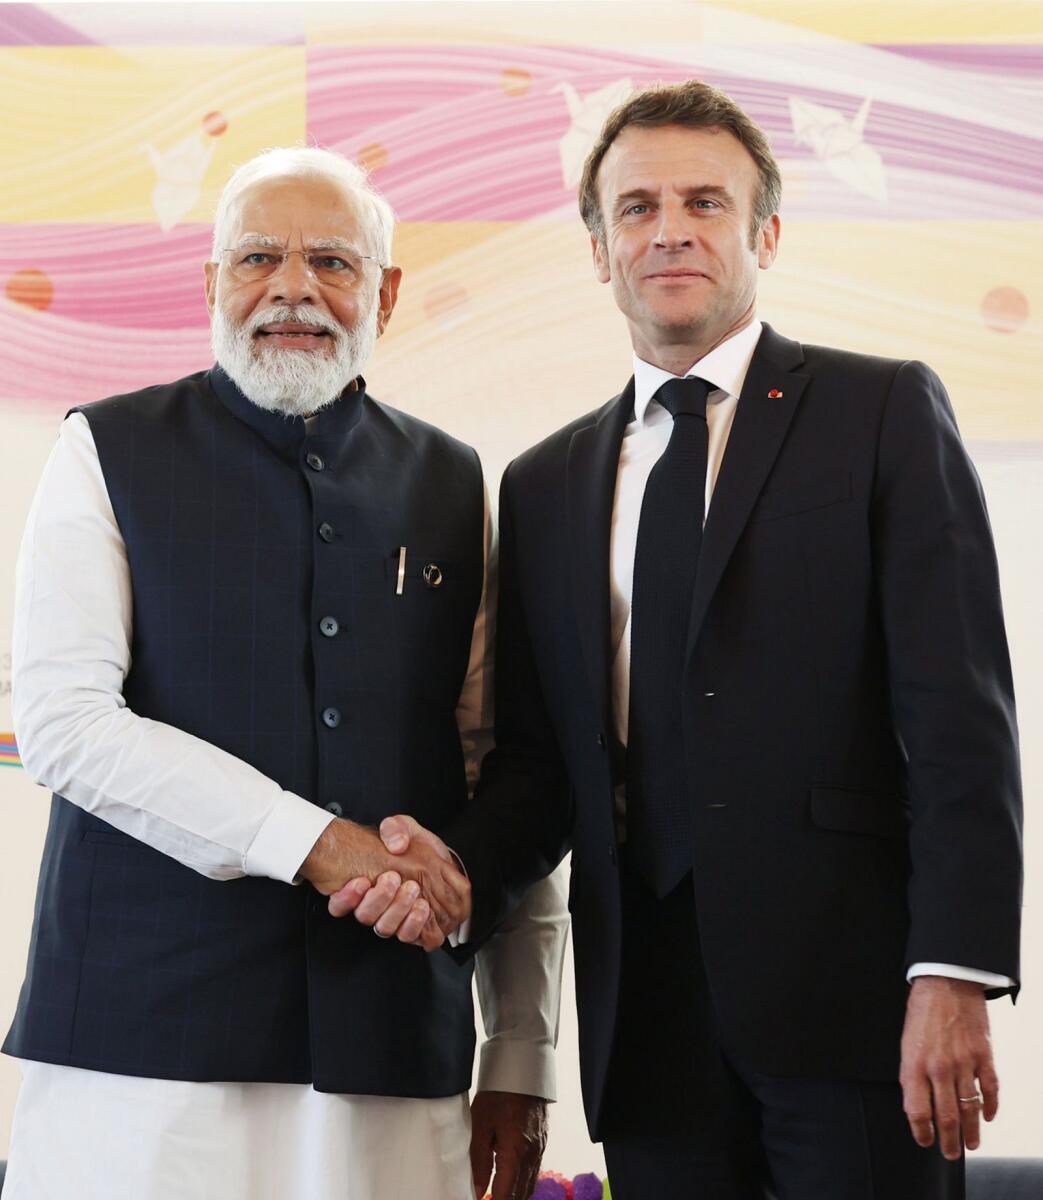 Prime Minister Narendra Modi with French President Emmanuel Macron during a meeting at the G7 Summit in Hiroshima, Japan, on Saturday. Photo: PTI